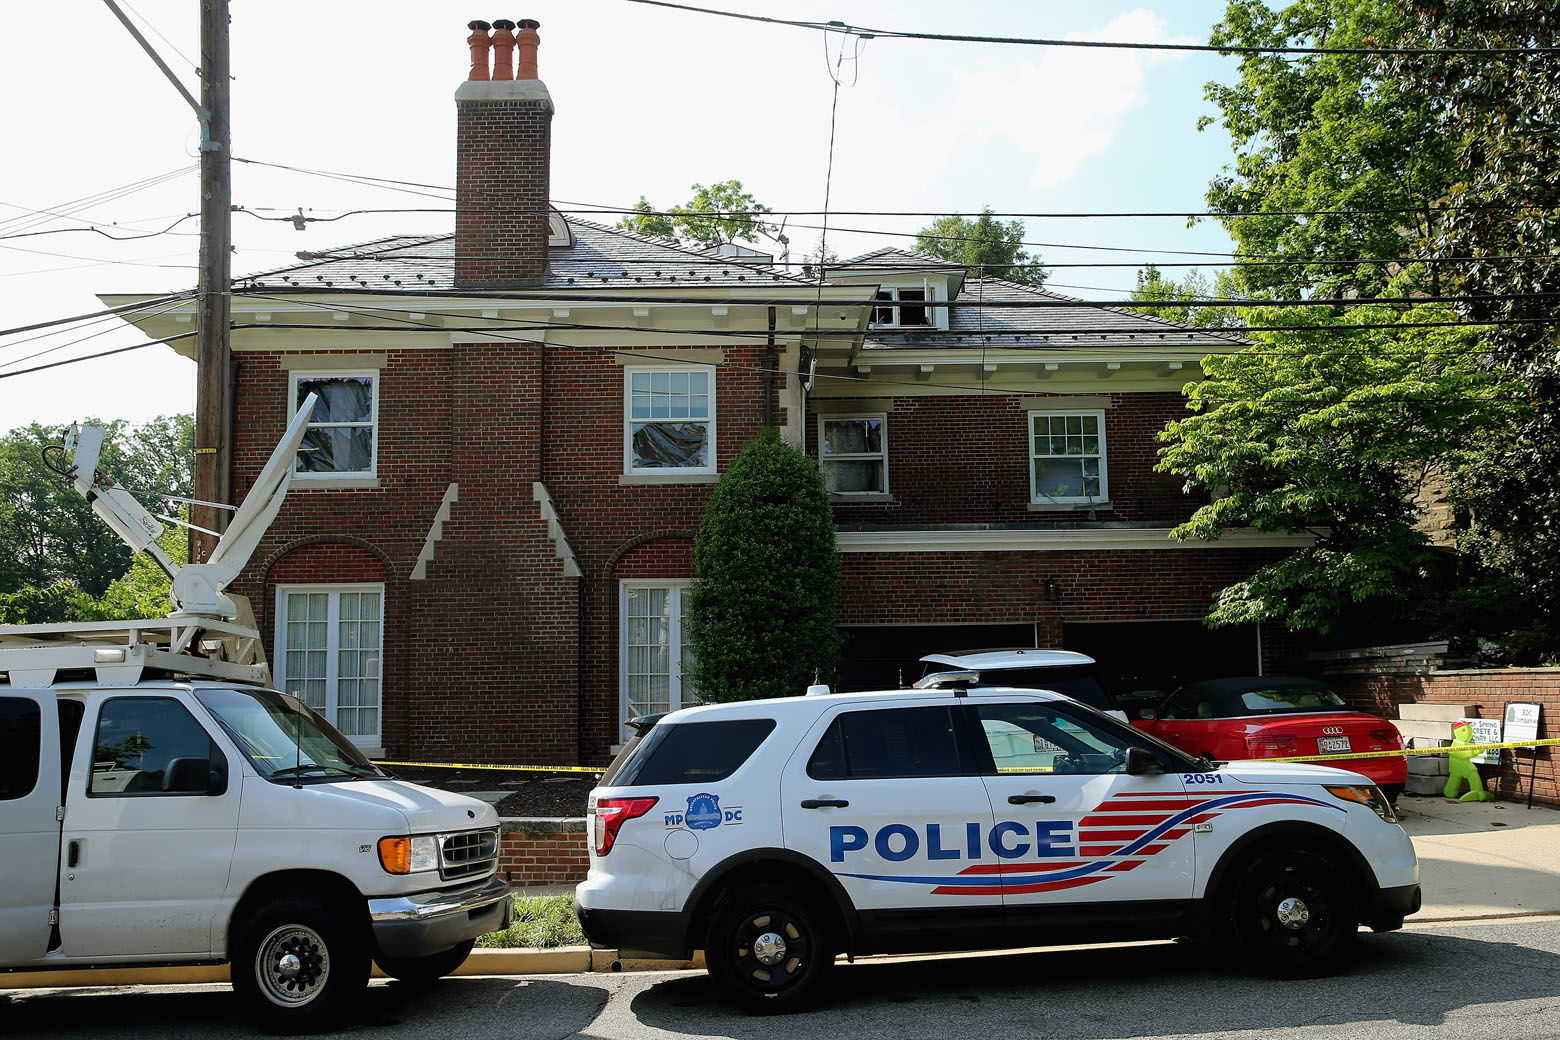 WASHINGTON, DC - MAY 19:  District of Columbia Metropolitan Police maintain a perimeter around the house on the 3200 block of Woodland Drive NW May 19, 2015 in Washington, DC. Firefighters discovered the bodies of Savvas Savopoulos, 46, his wife Amy, 47, their 10-year-old son Philip, and the housekeeper, Veralicia Figueroa, 57, last Thursday afternoon when they responded to a blaze at the house. Two Savopoulos daughters were away in boarding school at the time. Investigators have ruled the deaths homicides and say they could continue to collect evidence at the house for another week.  (Photo by Chip Somodevilla/Getty Images)